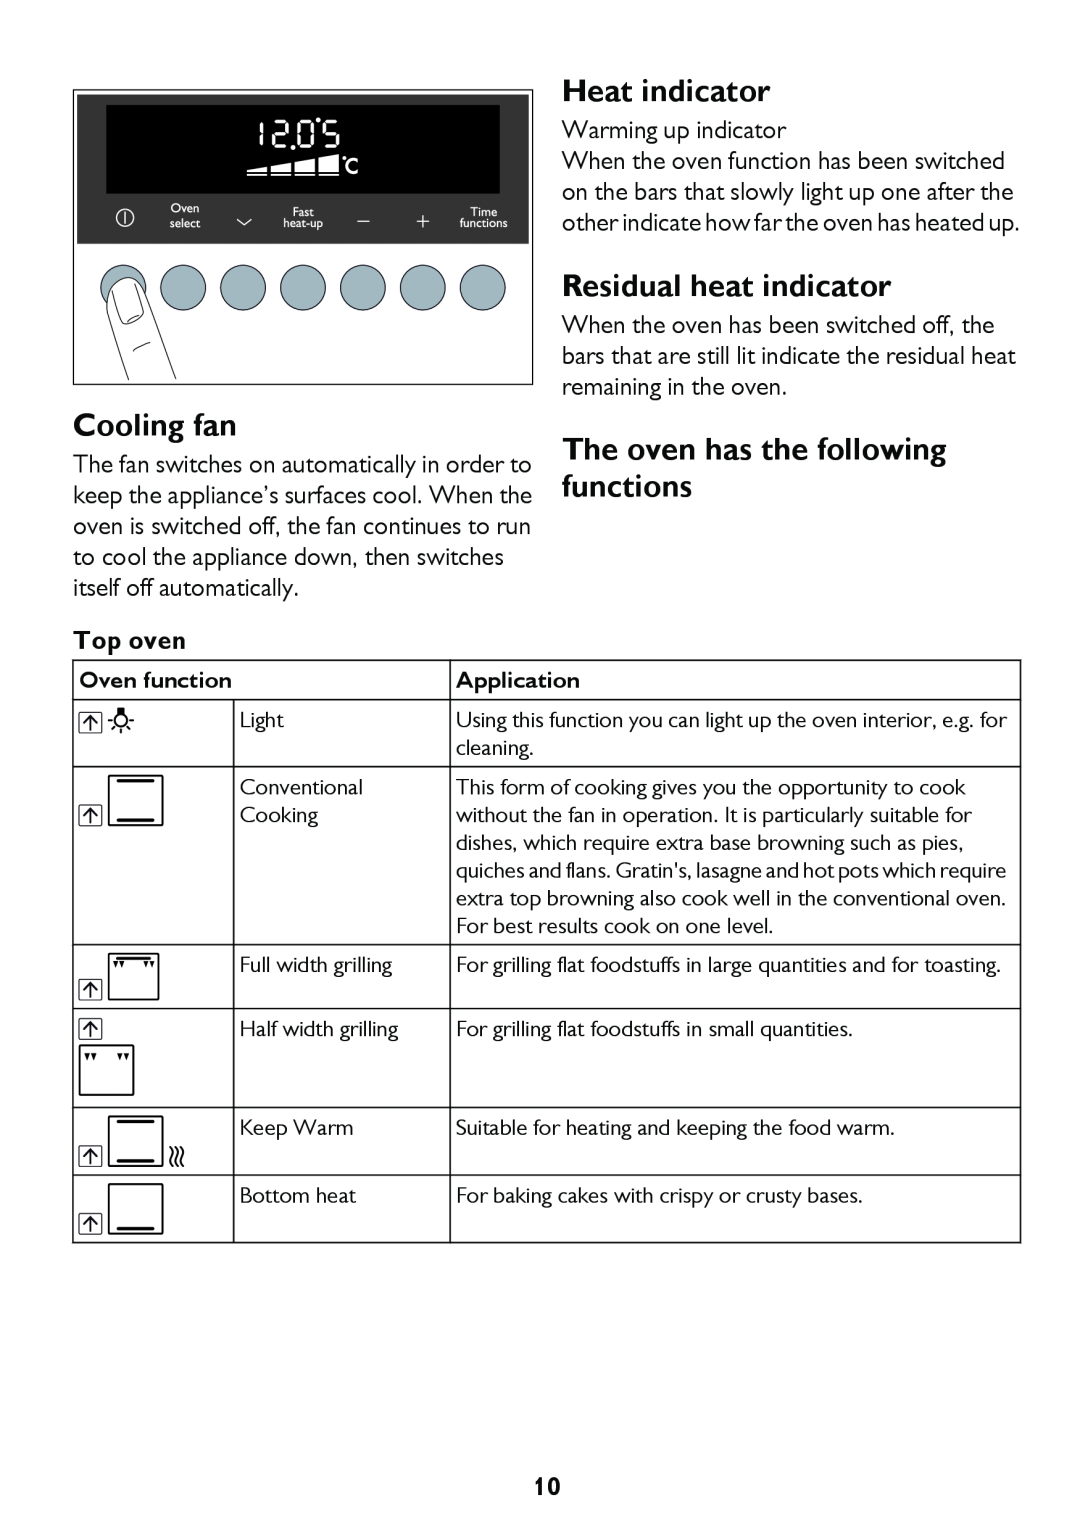 John Lewis JLBIDO913 Heat indicator, Residual heat indicator, Cooling fan, The oven has the following functions, Top oven 